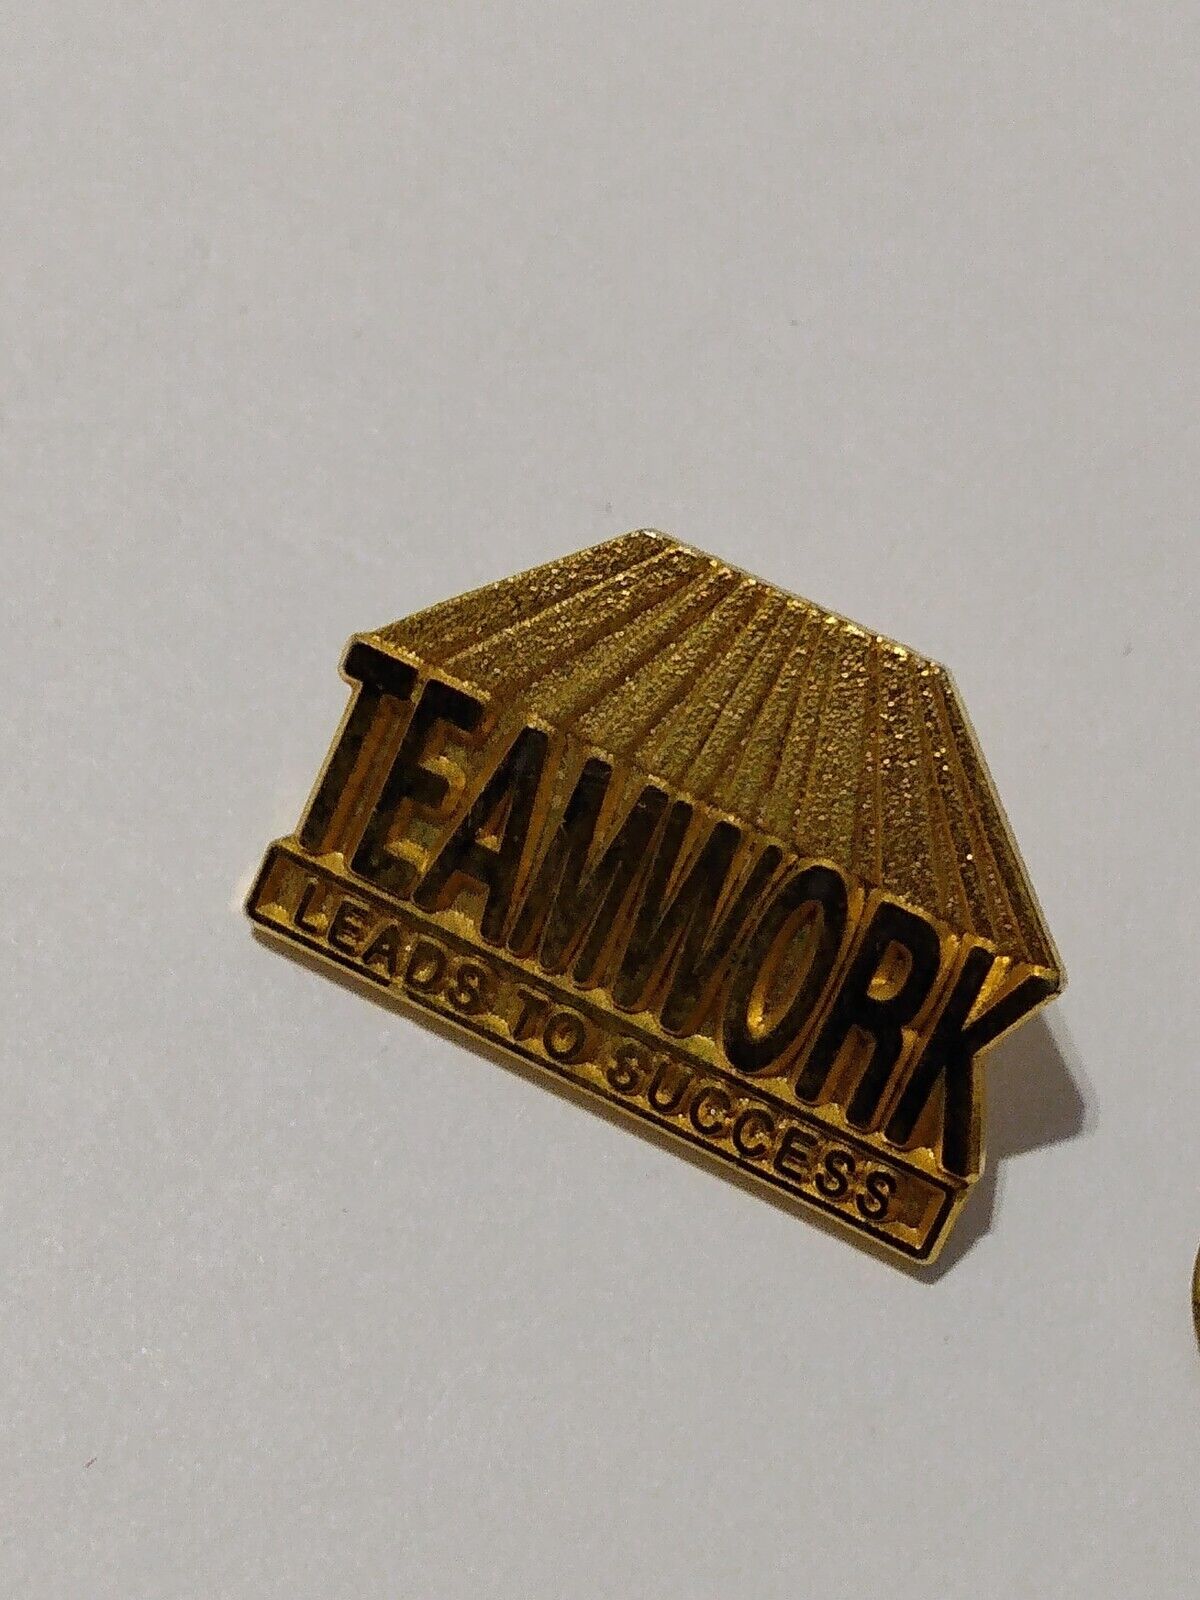 Teamwork Leads to Success Gold Tone Lapel Pin